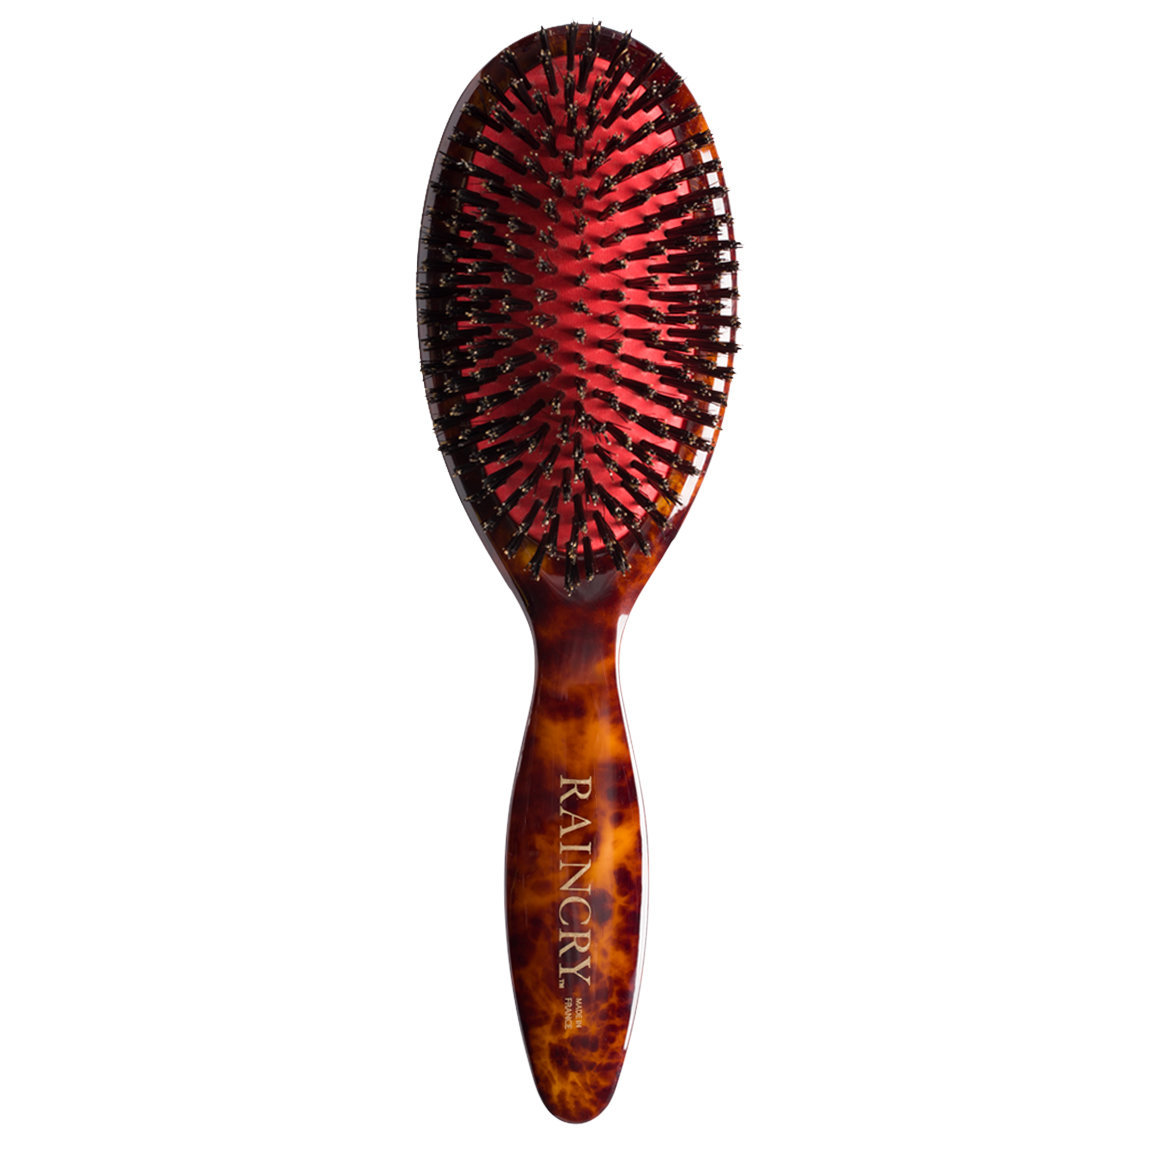 Raincry Condition Paddle Brush Large alternative view 1 - product swatch.